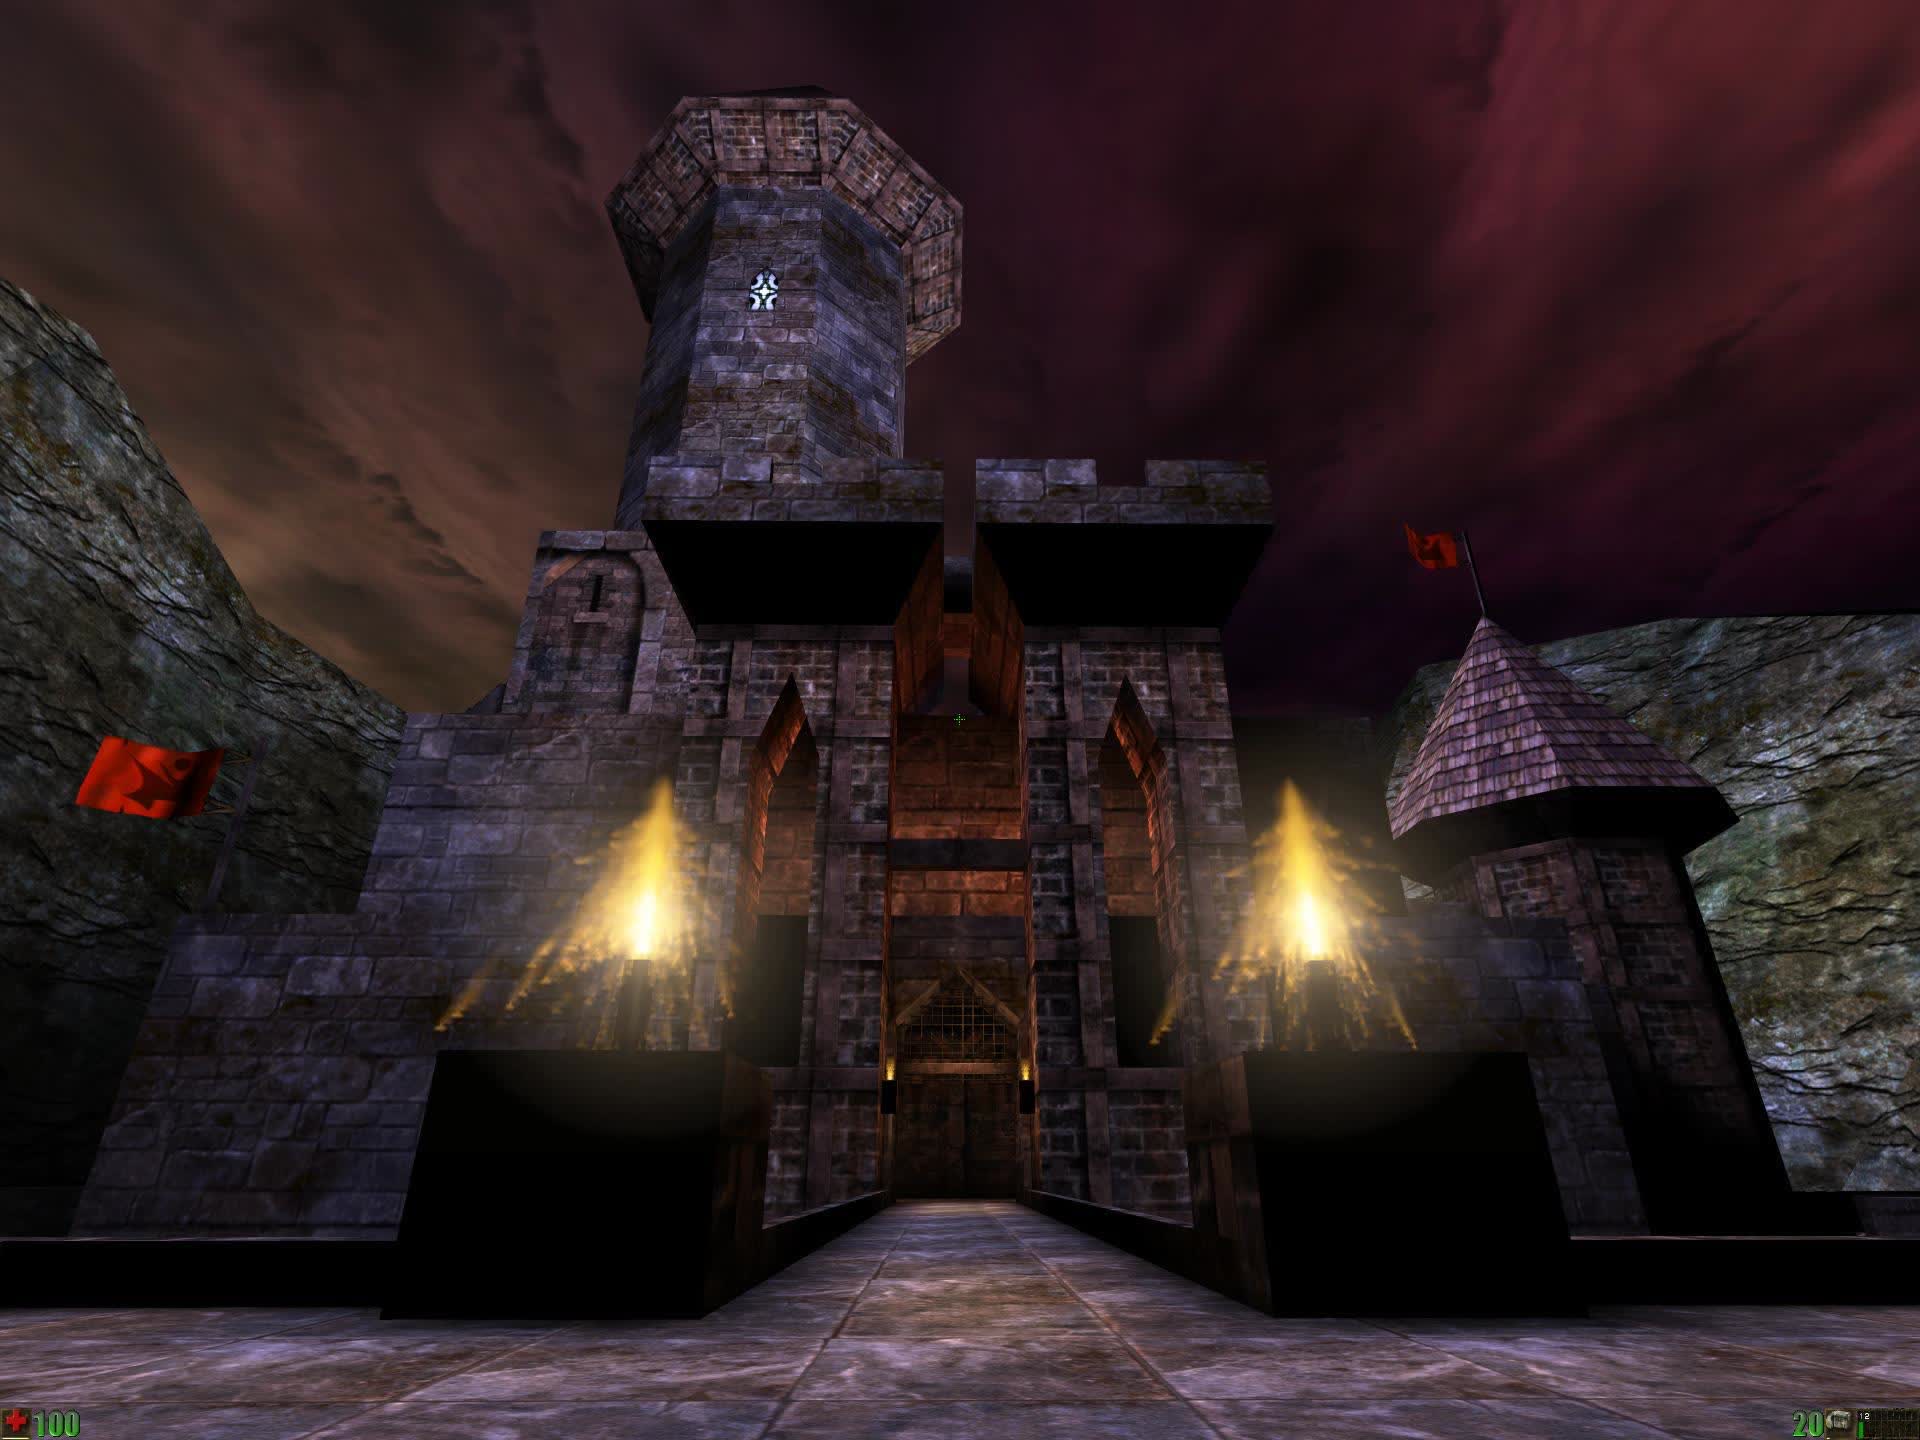 After doing Quake, Nightdive Studios wants to remaster Unreal, but the ball is in Epic's court